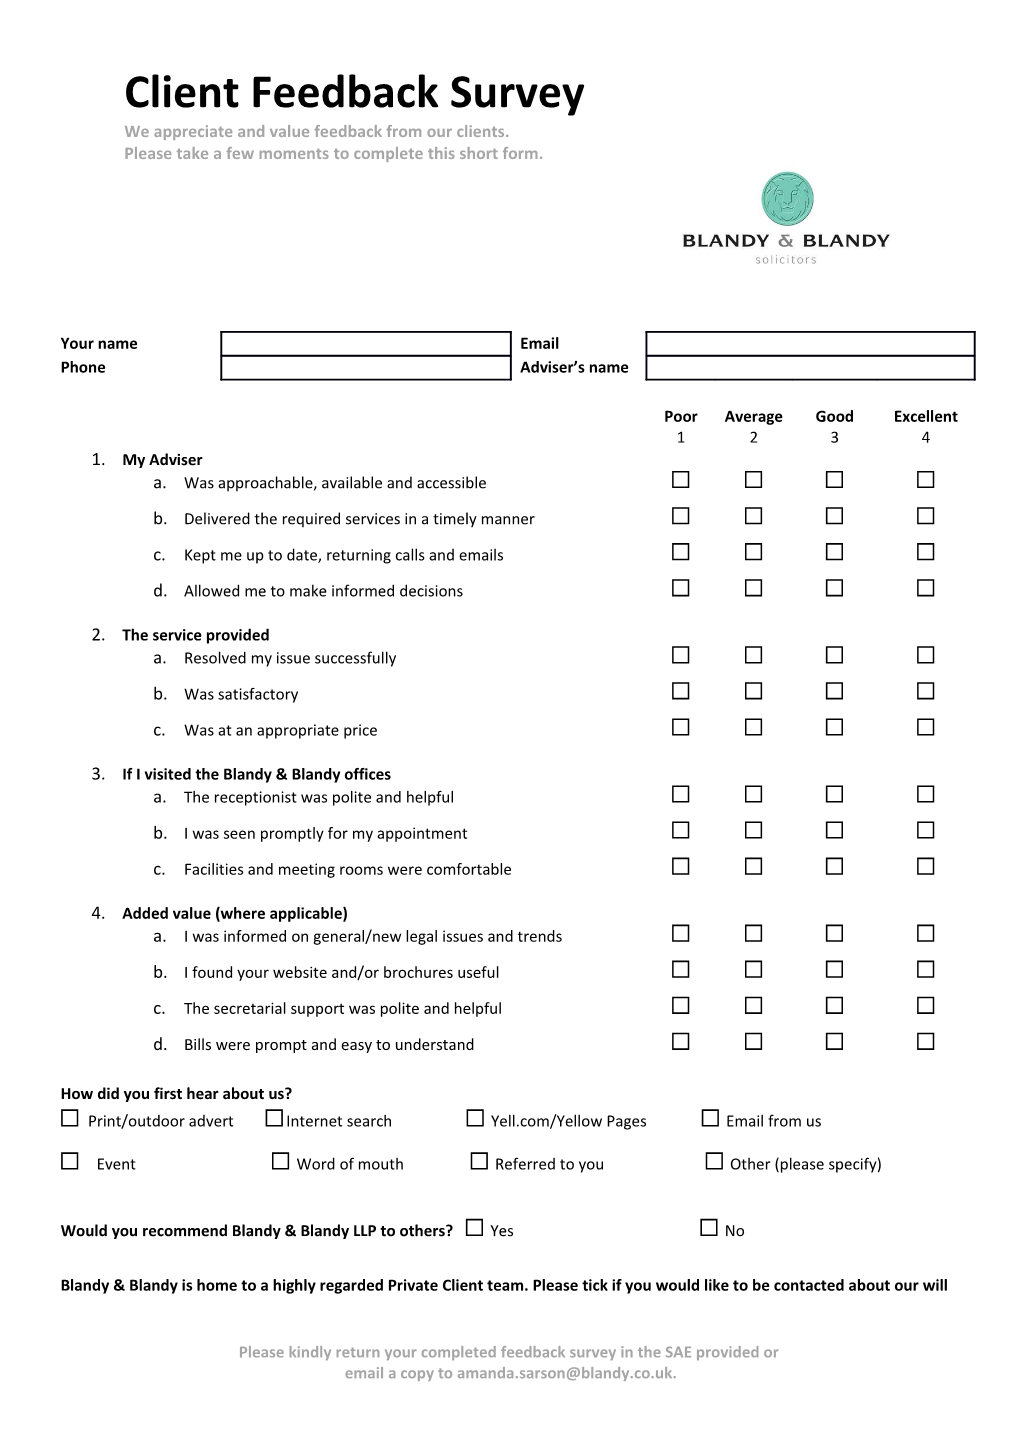 Please Kindly Return Your Completed Feedback Survey in the SAE Provided Or Email a Copy to